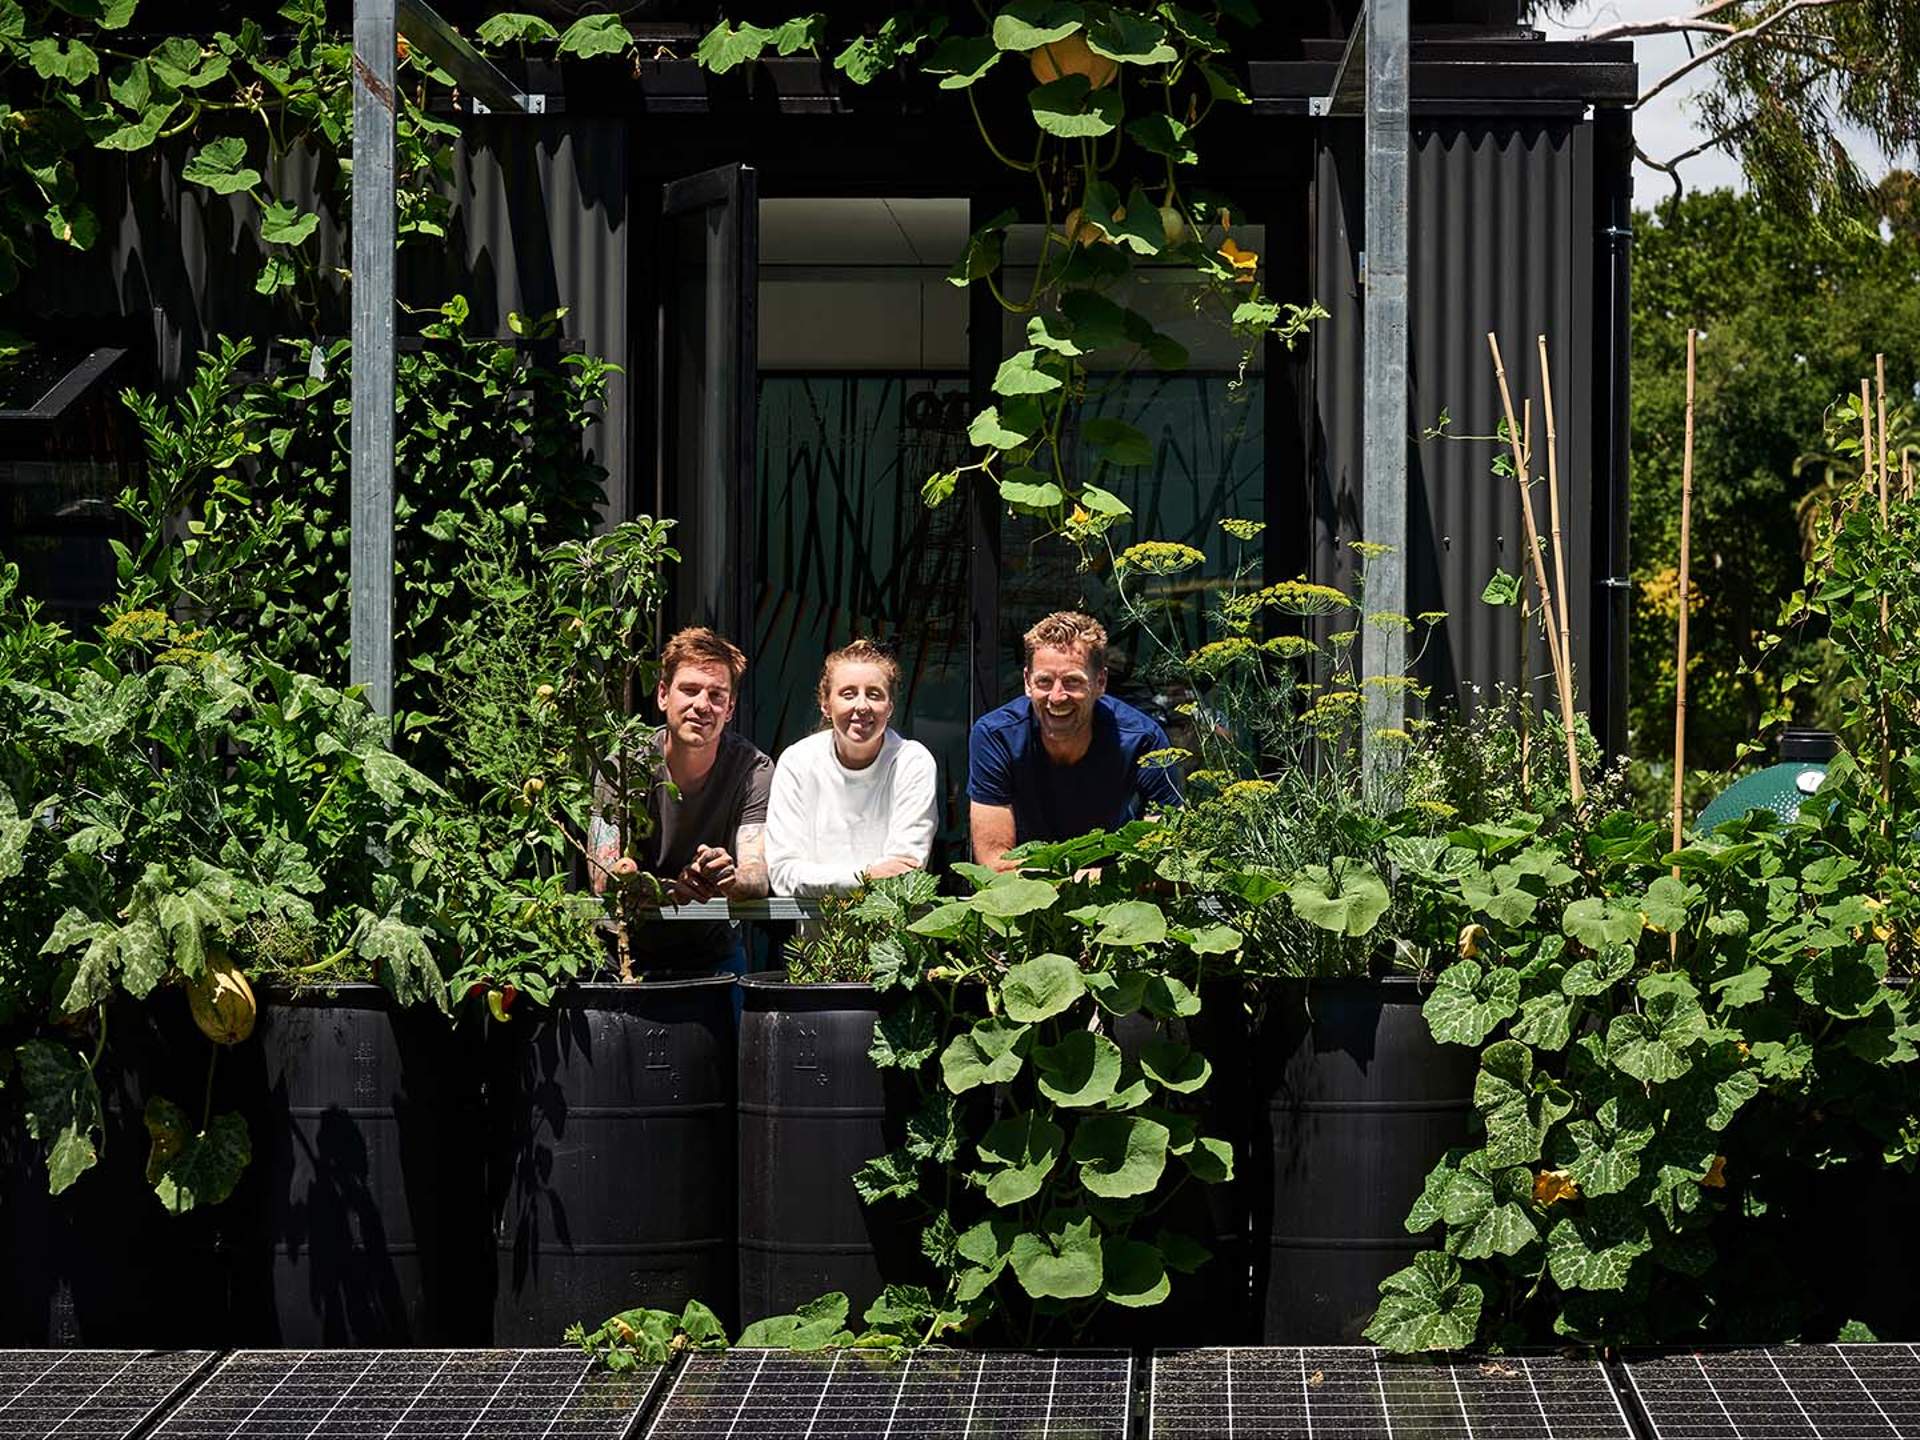 Greenhouse by Joost, Melbourne